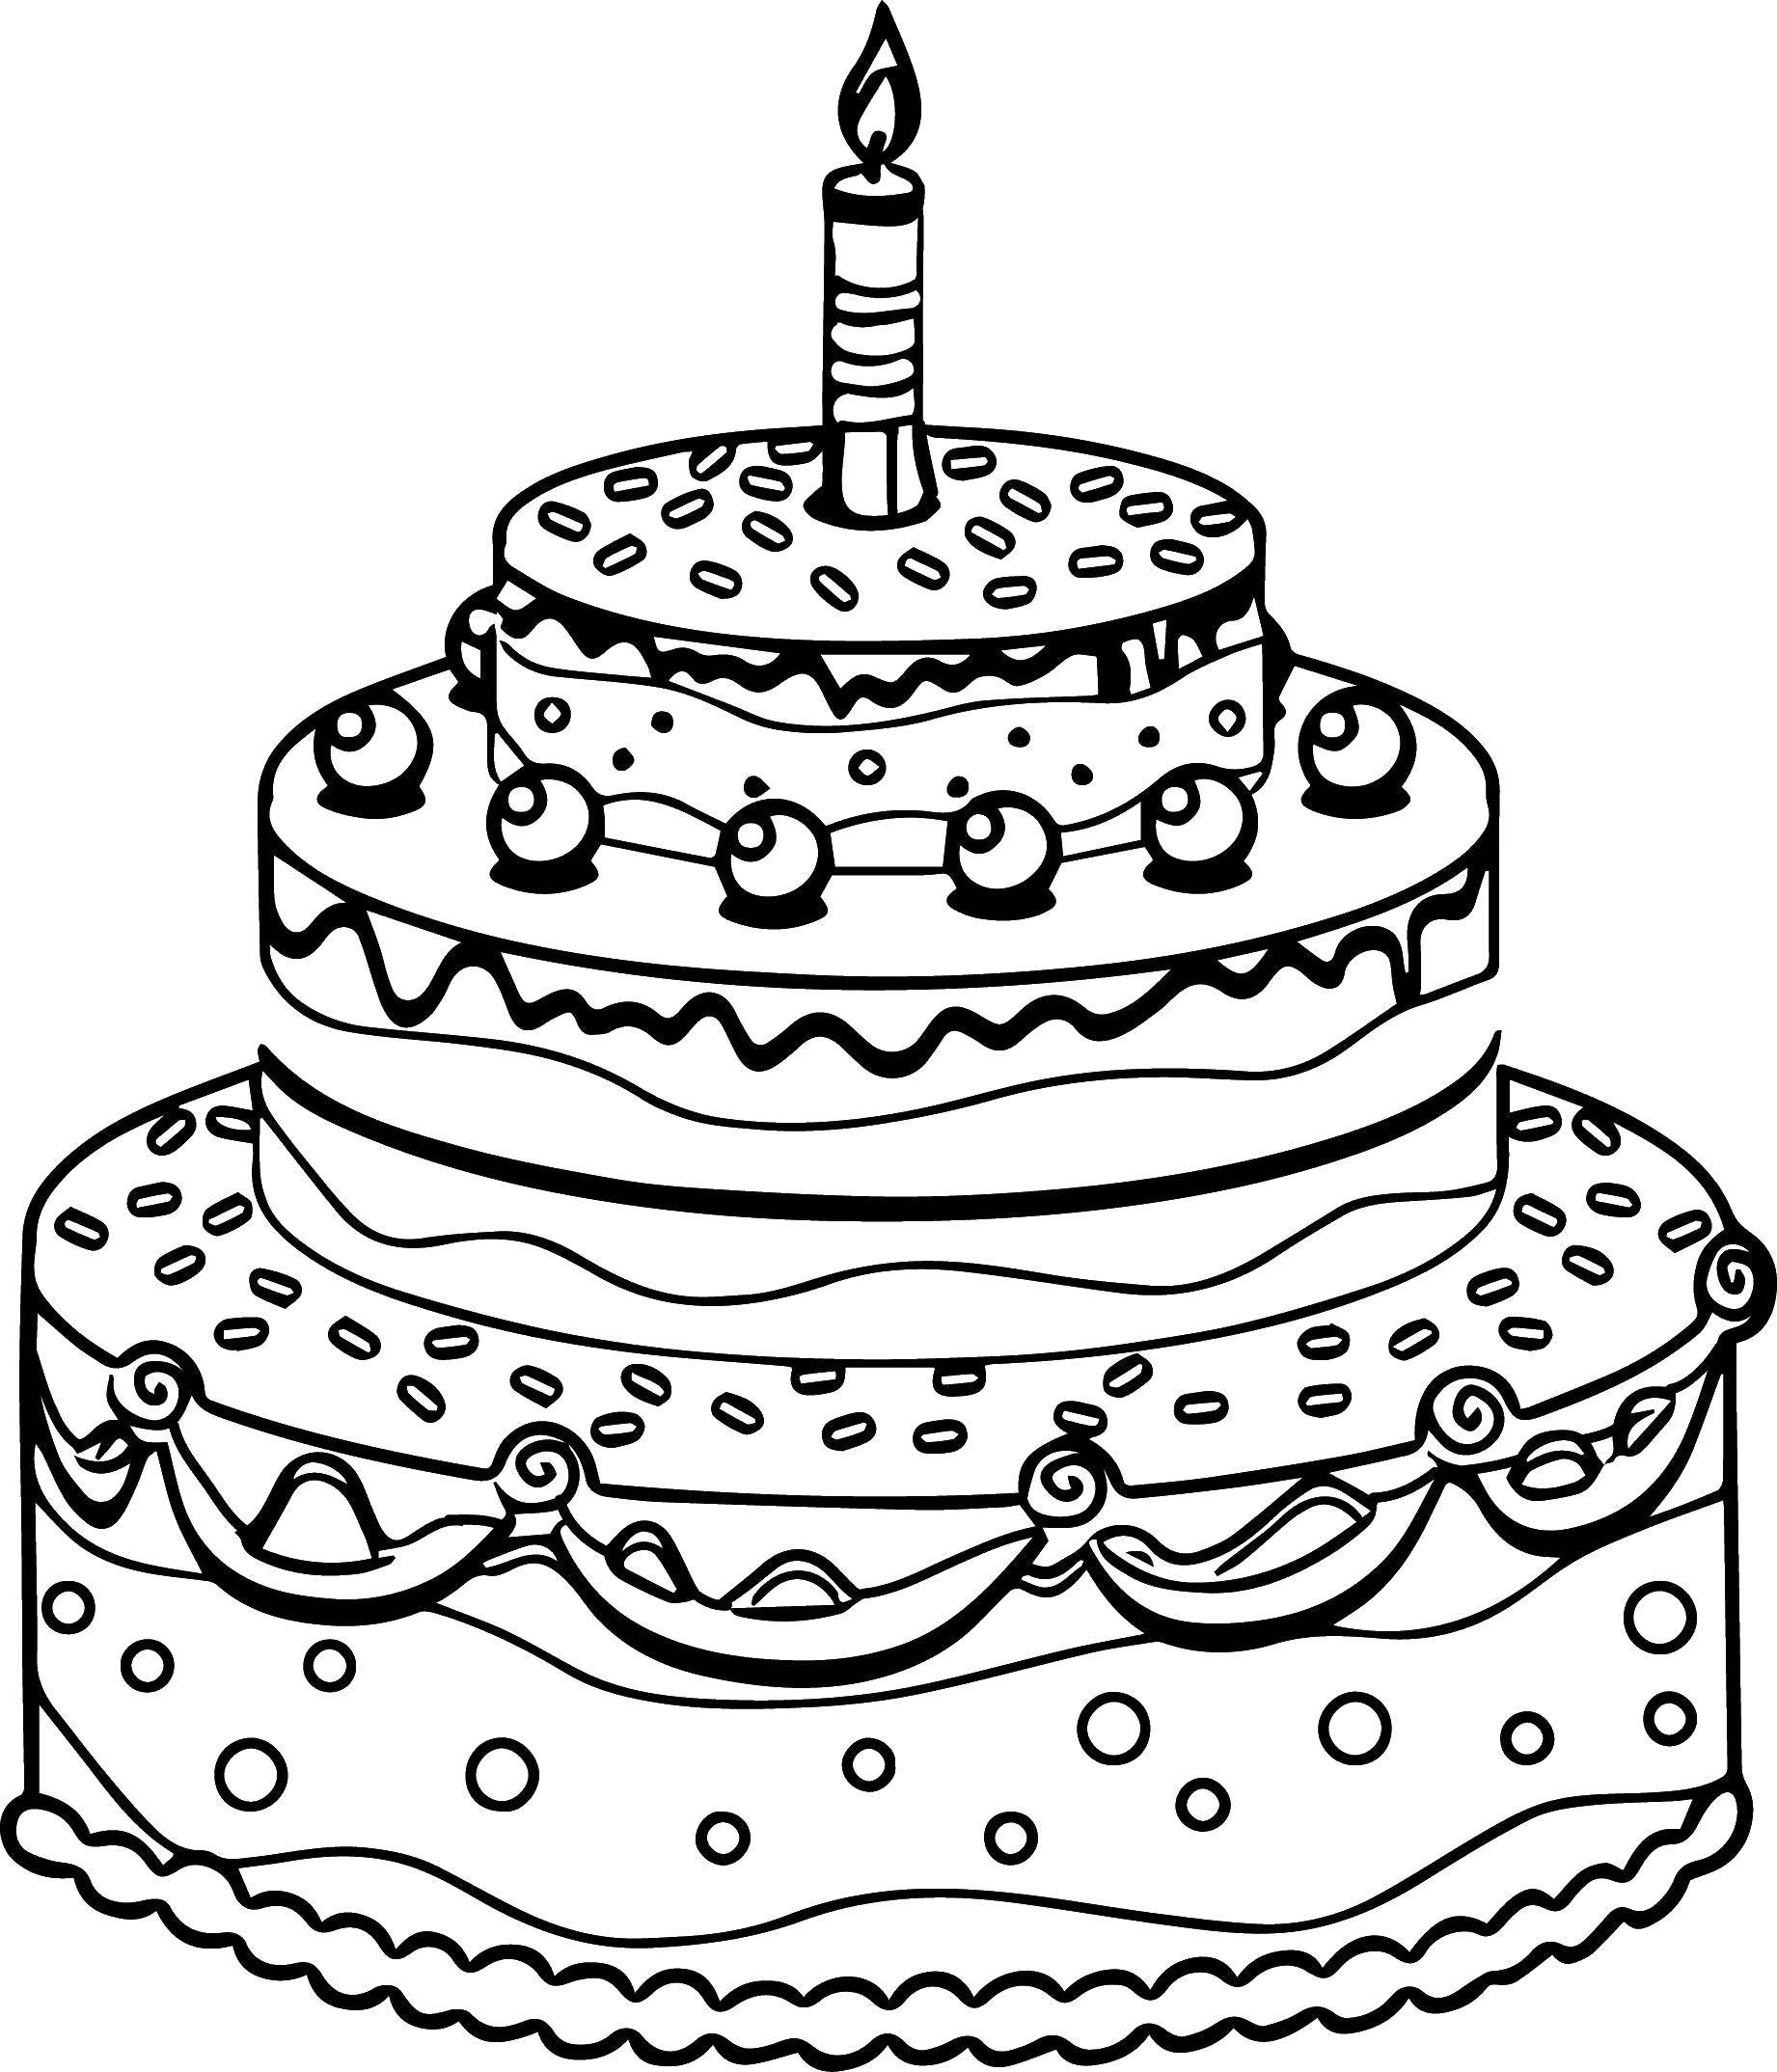 Coloring A big cake with a candle. Category cakes. Tags:  cake, candles, berries.